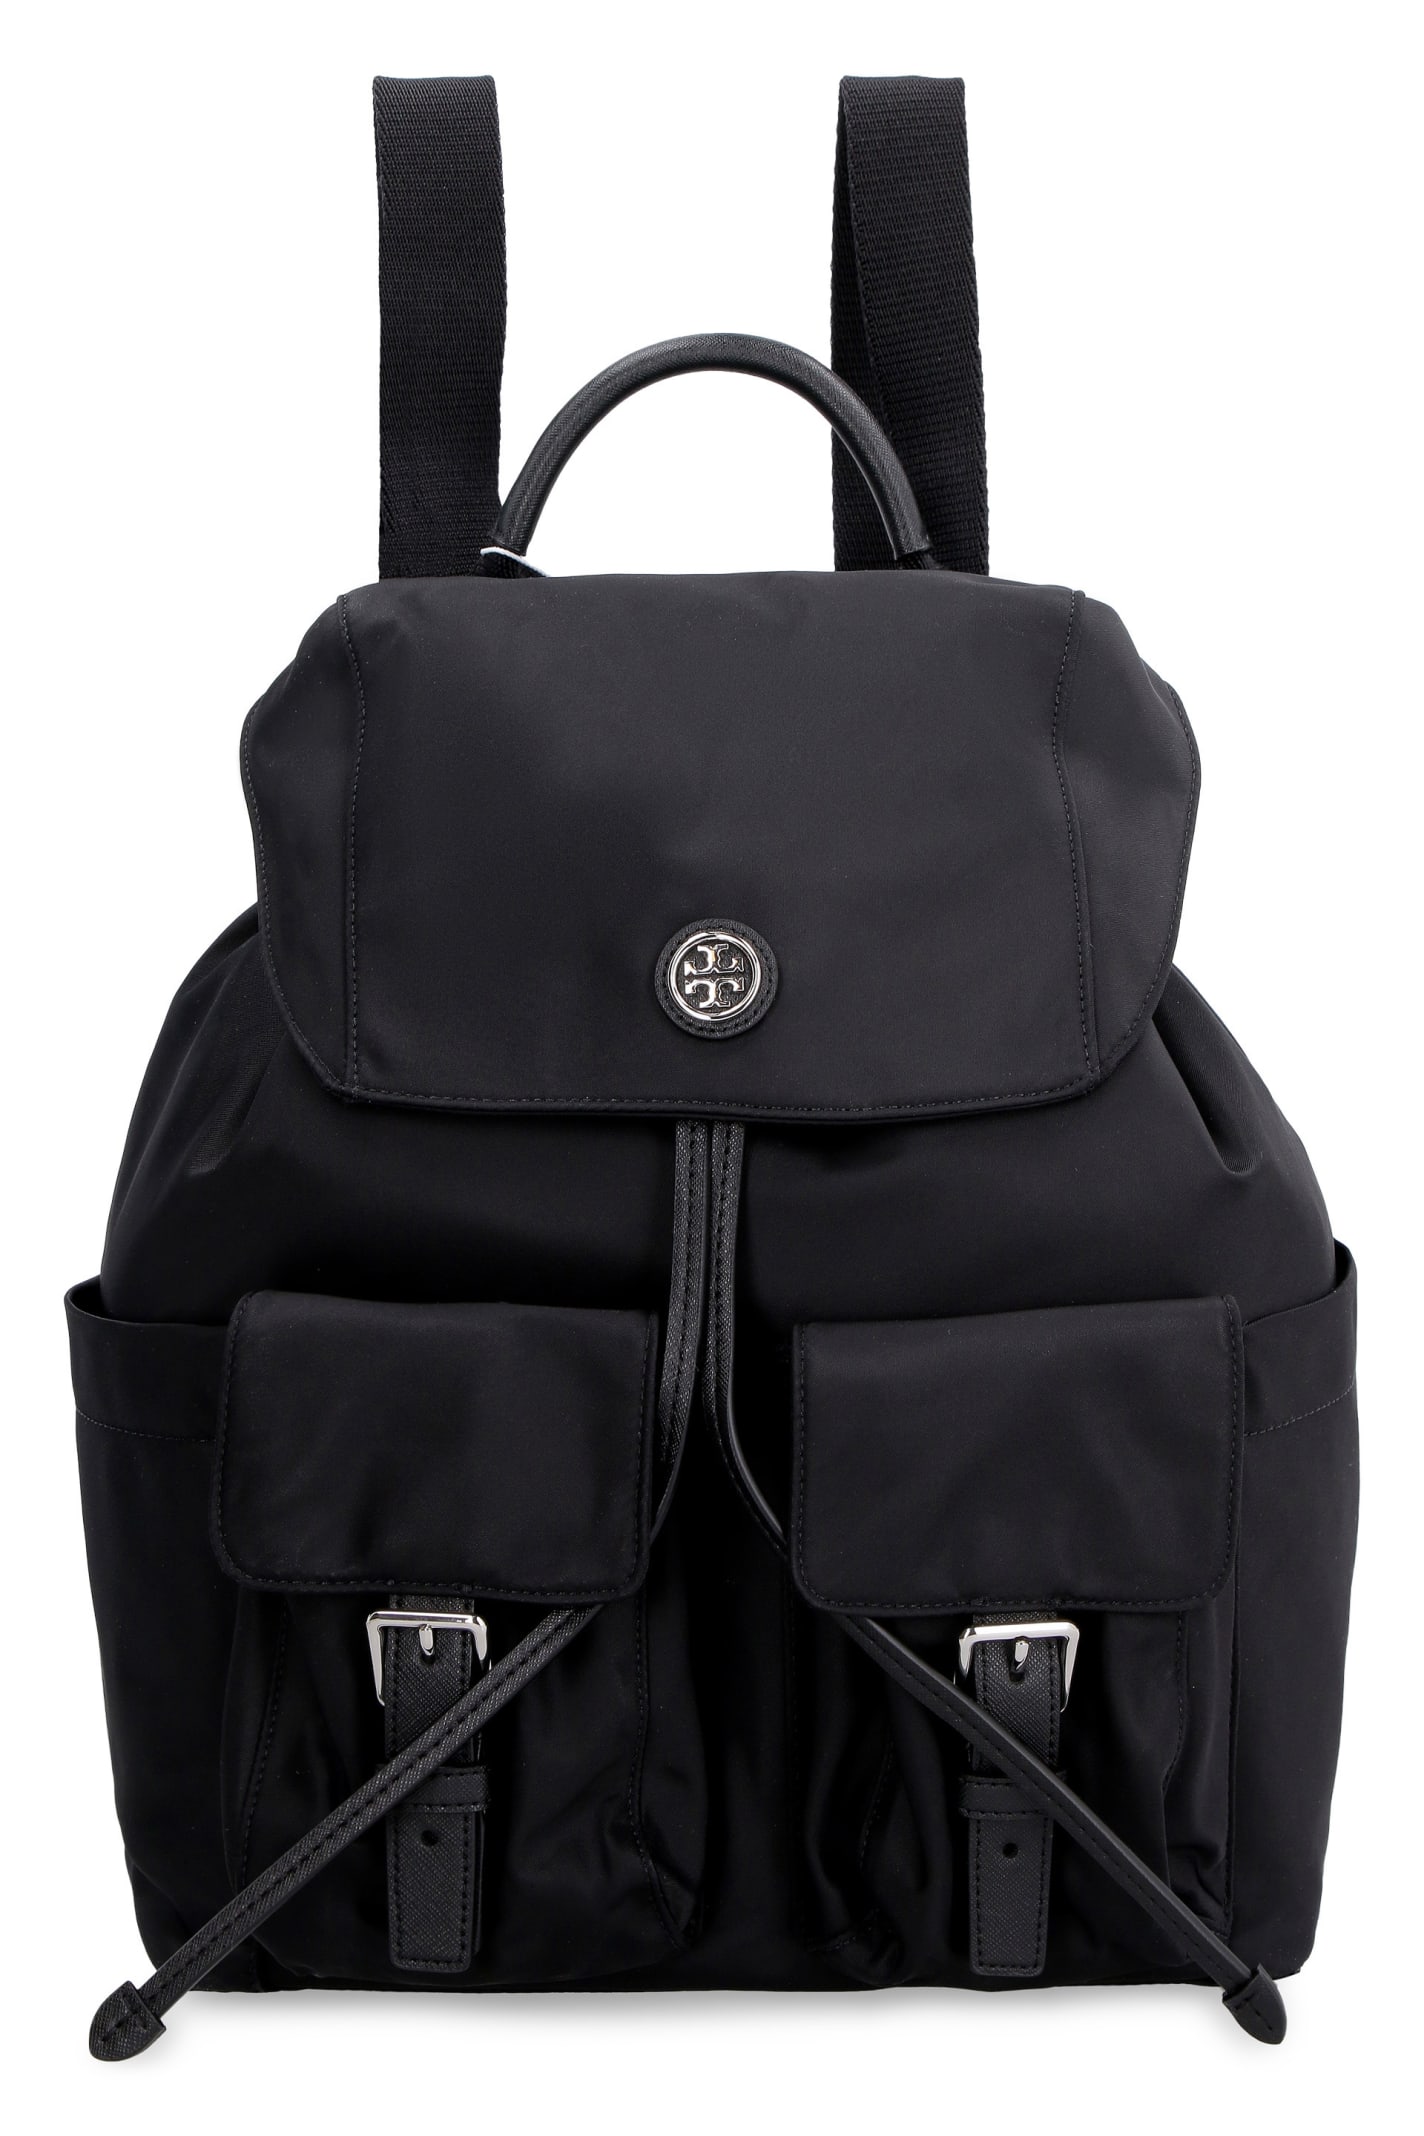 Tory Burch Virginia Leather Details Nylon Backpack